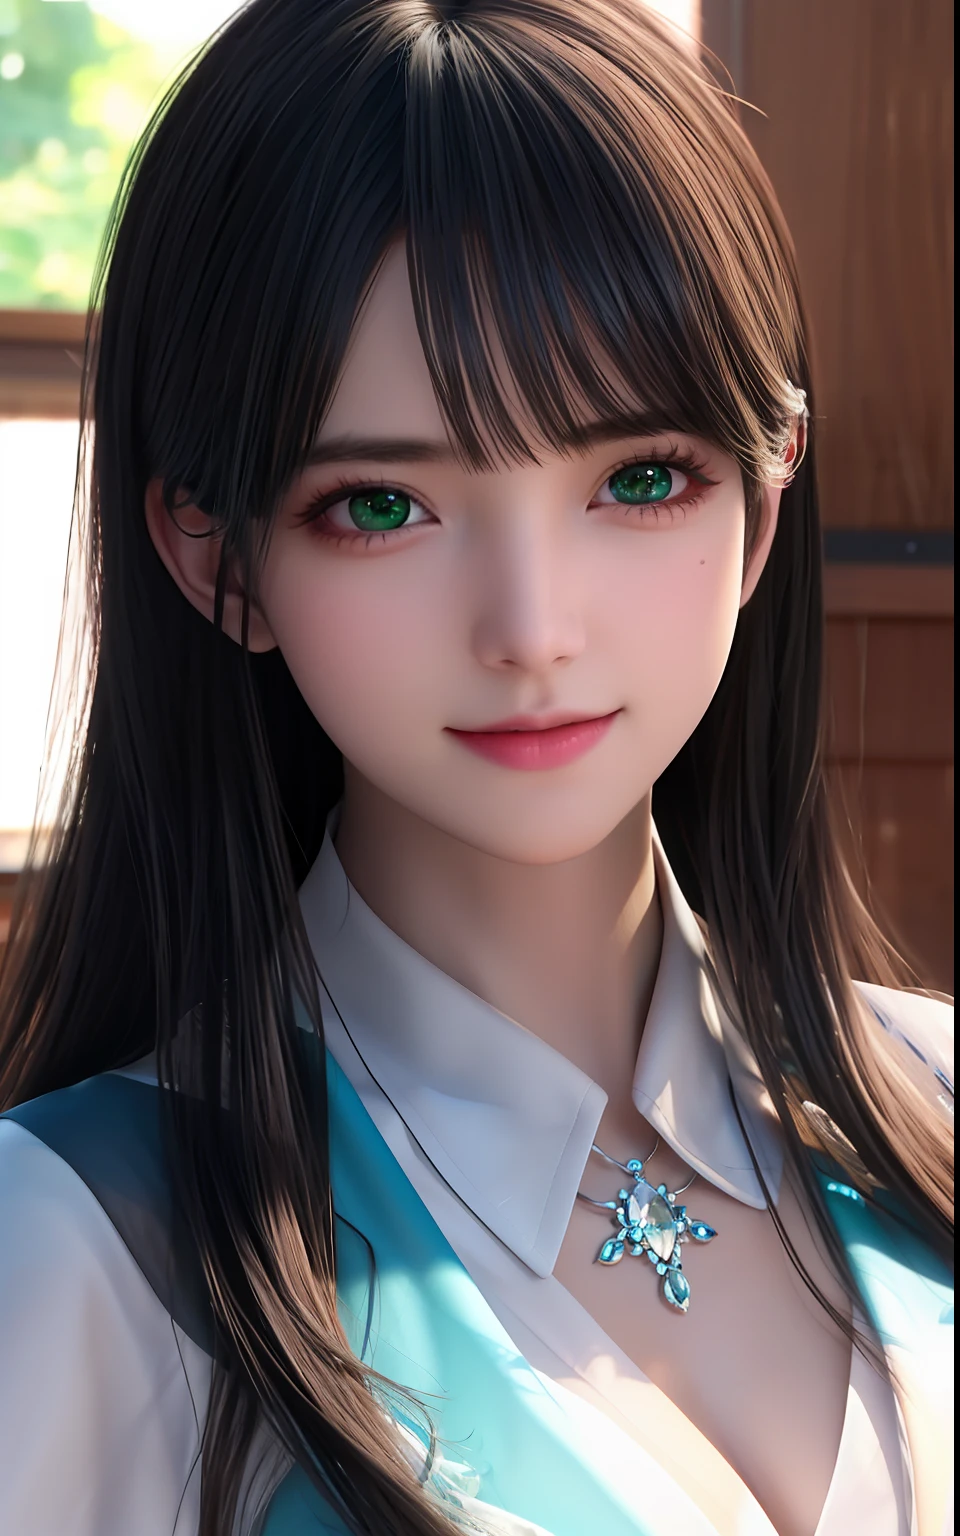 ulzzang -6500-v1.1, (Photorealsitic:1.4), and souls、anime styled、ssmile、portraitures、Beautiful and moisturized green eyes like crystal clear glass、Beautiful detailed woman, extremely detailed eye and face, Beautiful detailed eyes,  huge filesize, Ultra-detail, hight resolution, ighly detailed, top-quality, ​masterpiece,  illustratio, ighly detailed, nffsw, unification, 8k wallpaper, splendid, finely detail, ​masterpiece, top-quality, Highly detailed ticker uniform 8K wallpaper, Light on the Face、light、19-year-old girl